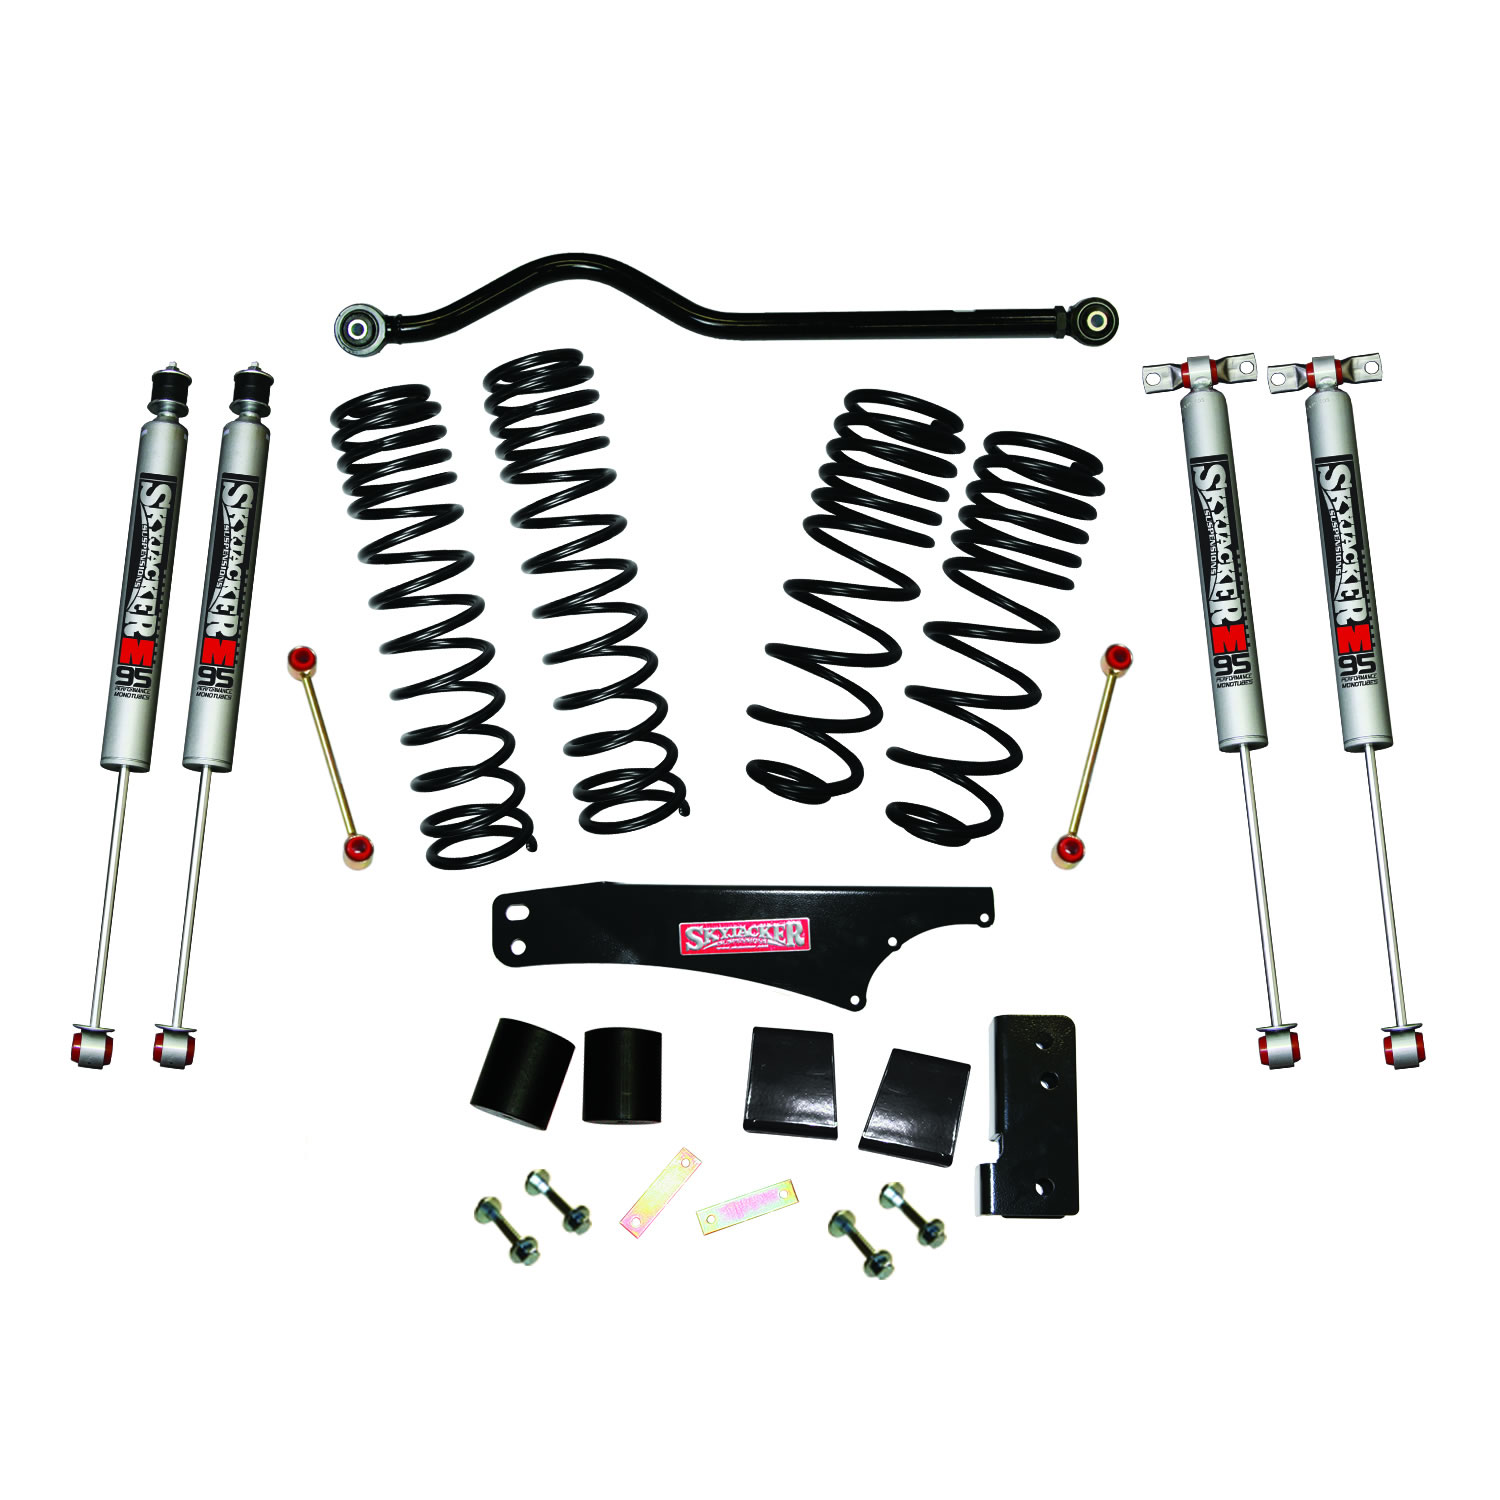 JK35BPMLT Front and Rear Suspension Lift Kit, Lift Amount: 3.5 in. Front/3.5 in. Rear